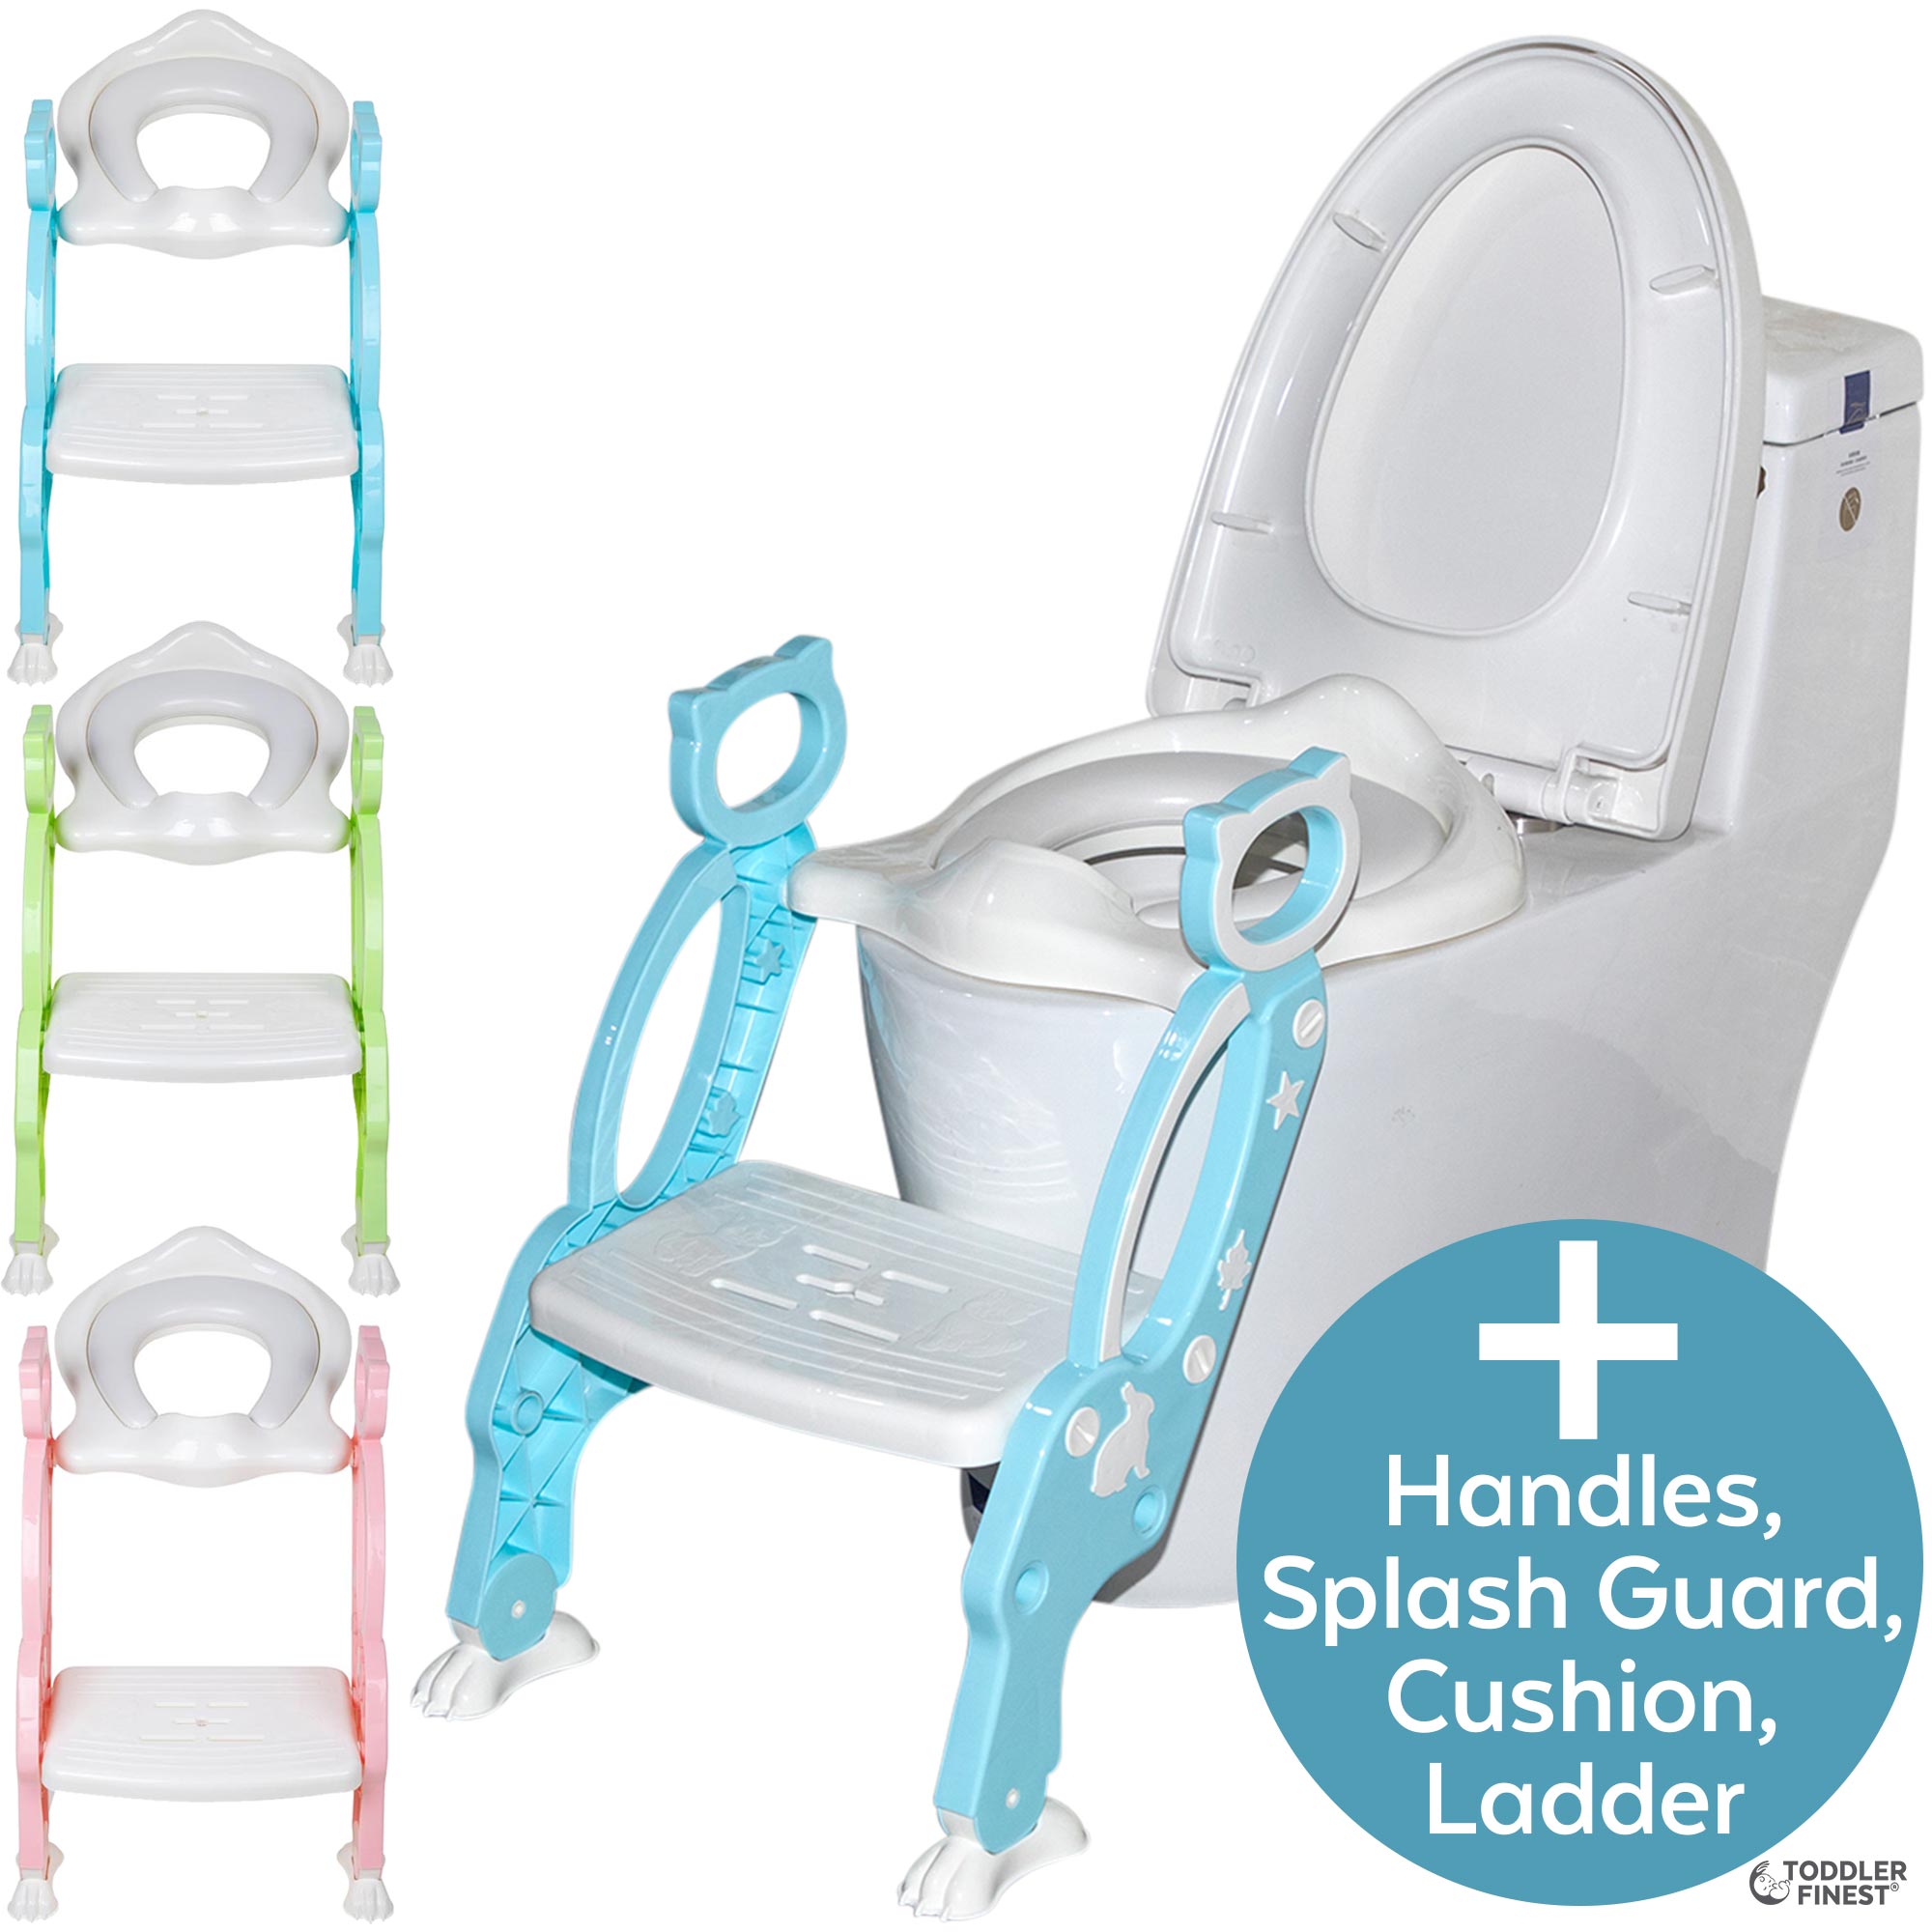 Toilet Training Seat with Non-Slip Step Stool Ladder for Toddlers,Kids and Baby,Potty Seat with Step,Toilet Seat Chair LYASI Potty Training Seat 